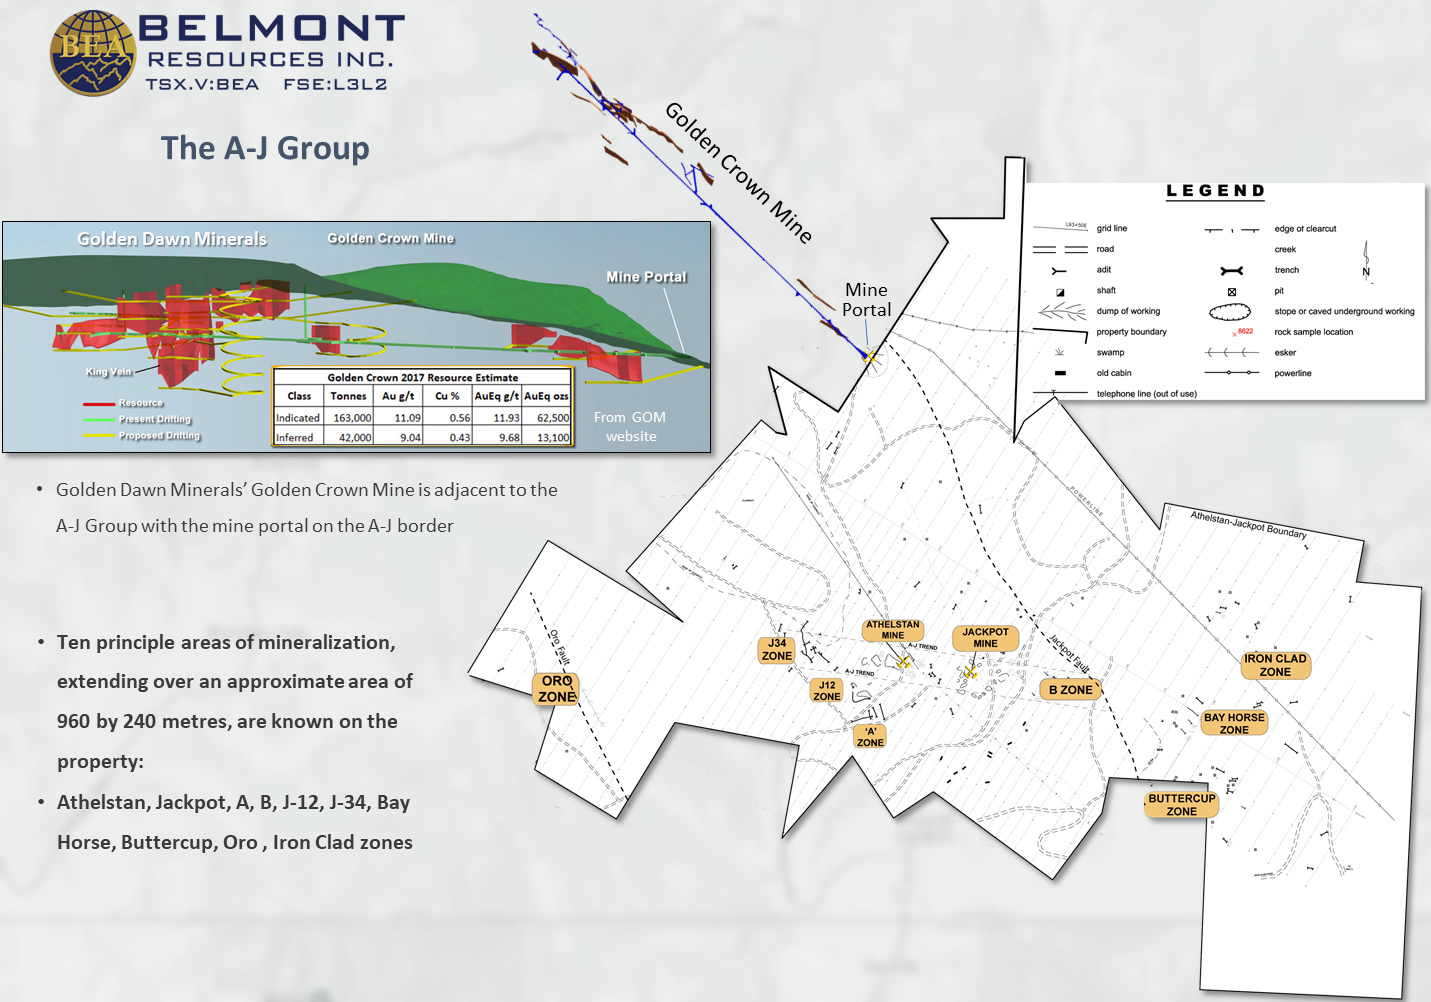 Belmont Resources Inc., Tuesday, June 23, 2020, Press release picture